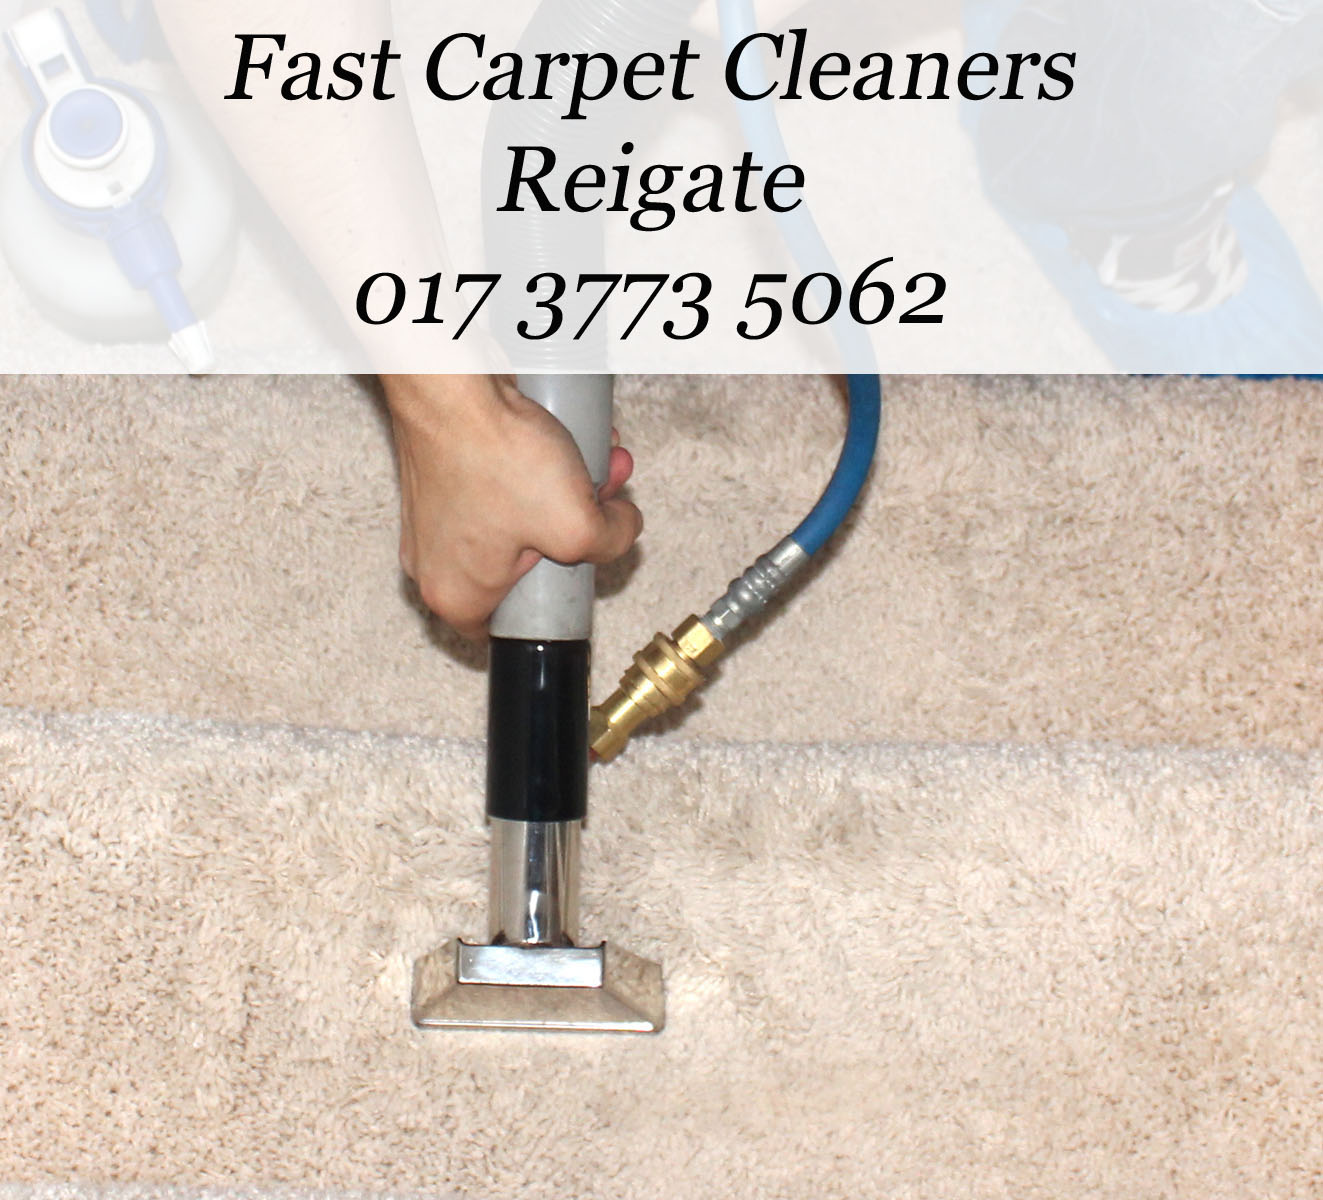 Carpet-Cleaning-Cleaners-Reigate